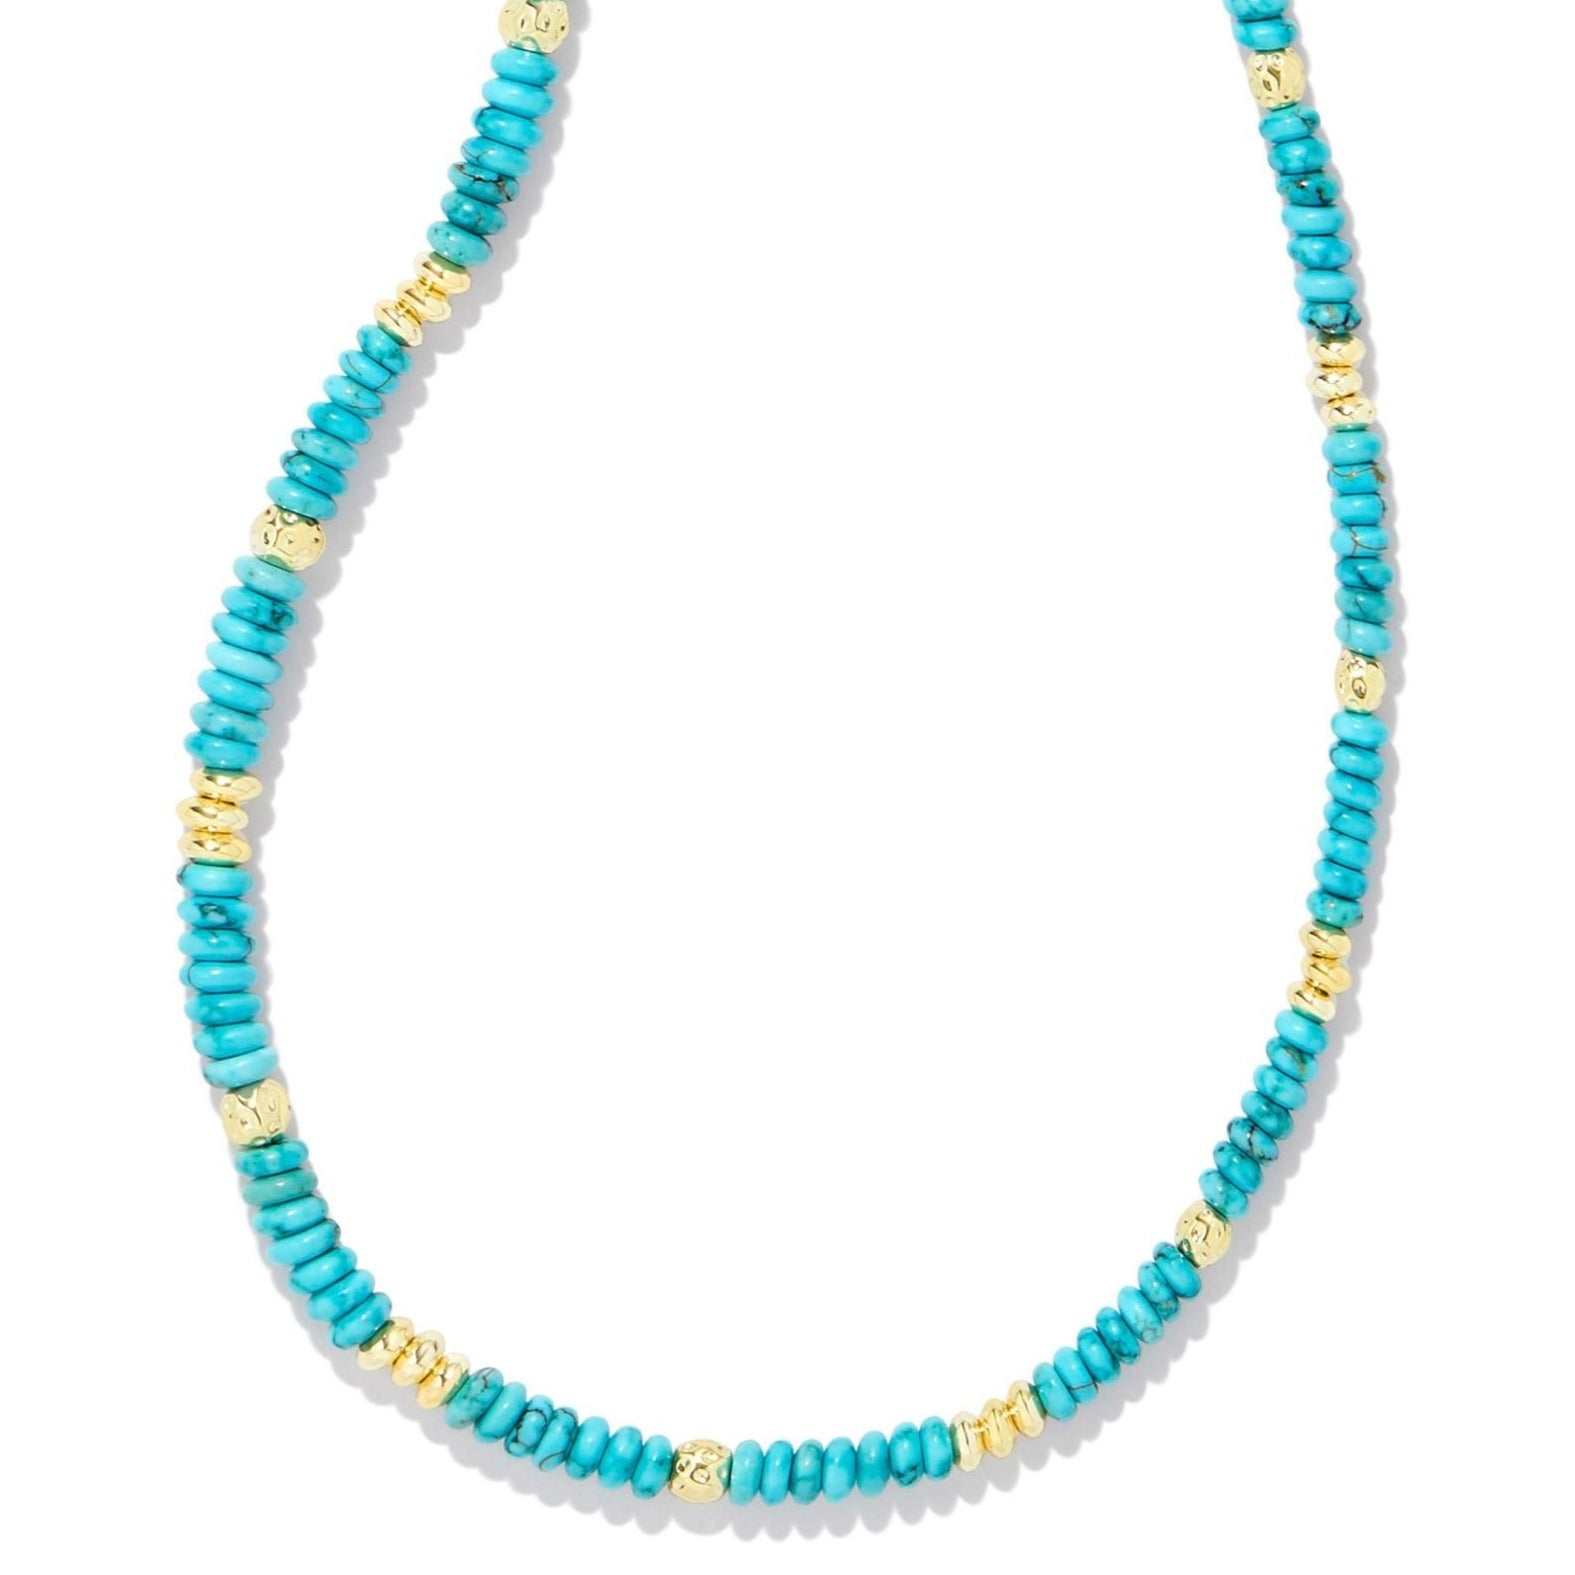 Kendra Scott | Deliah Gold Strand Necklace in Variegated Turquoise Magnesite - Giddy Up Glamour Boutique